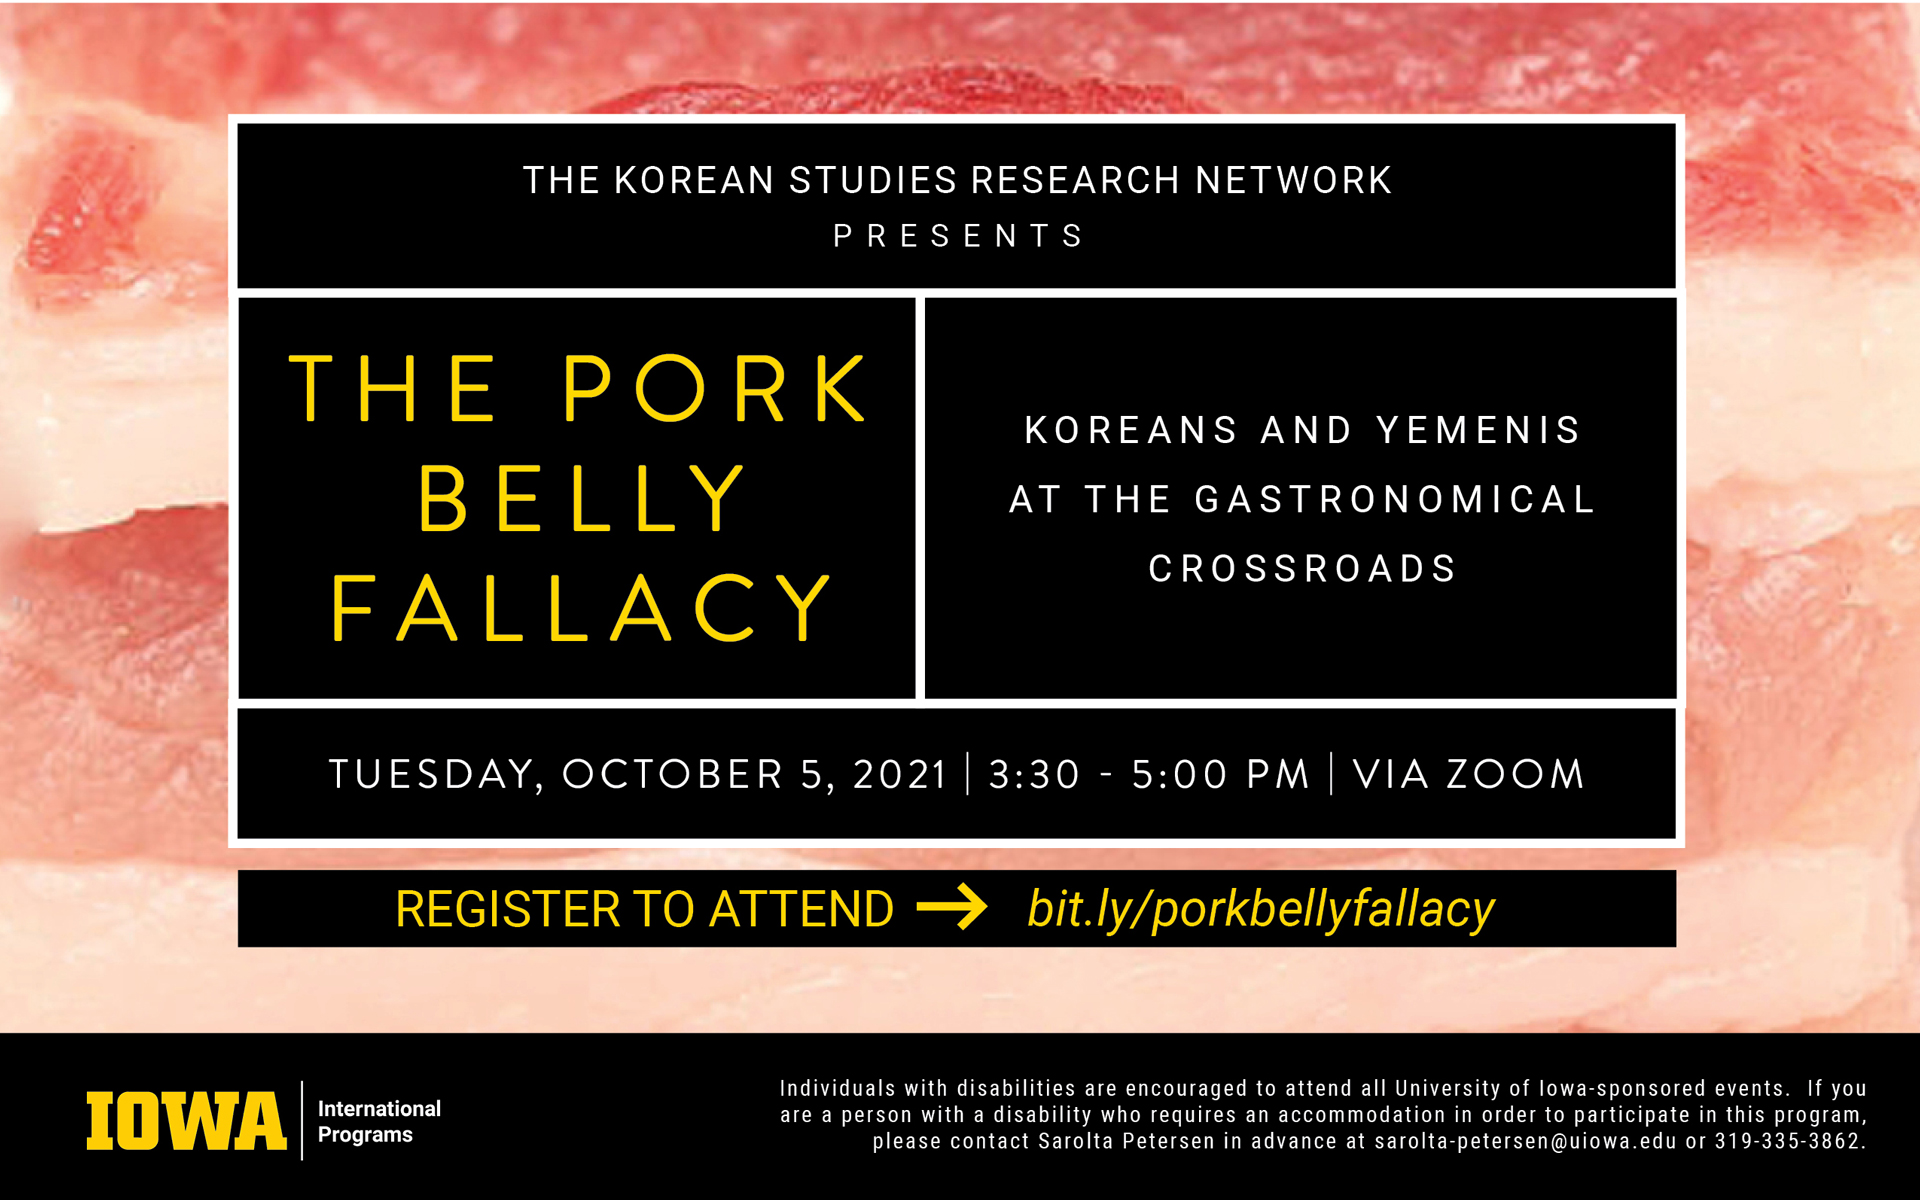 the korean studies research network presents the pork belly fallacy. Koreans and yemenis at the gastronomical crossroads. tuesday october 5 2021 from 3 30 to 5 30 pm via zoom. register to attend at bit.ly/porkbellyfallacy